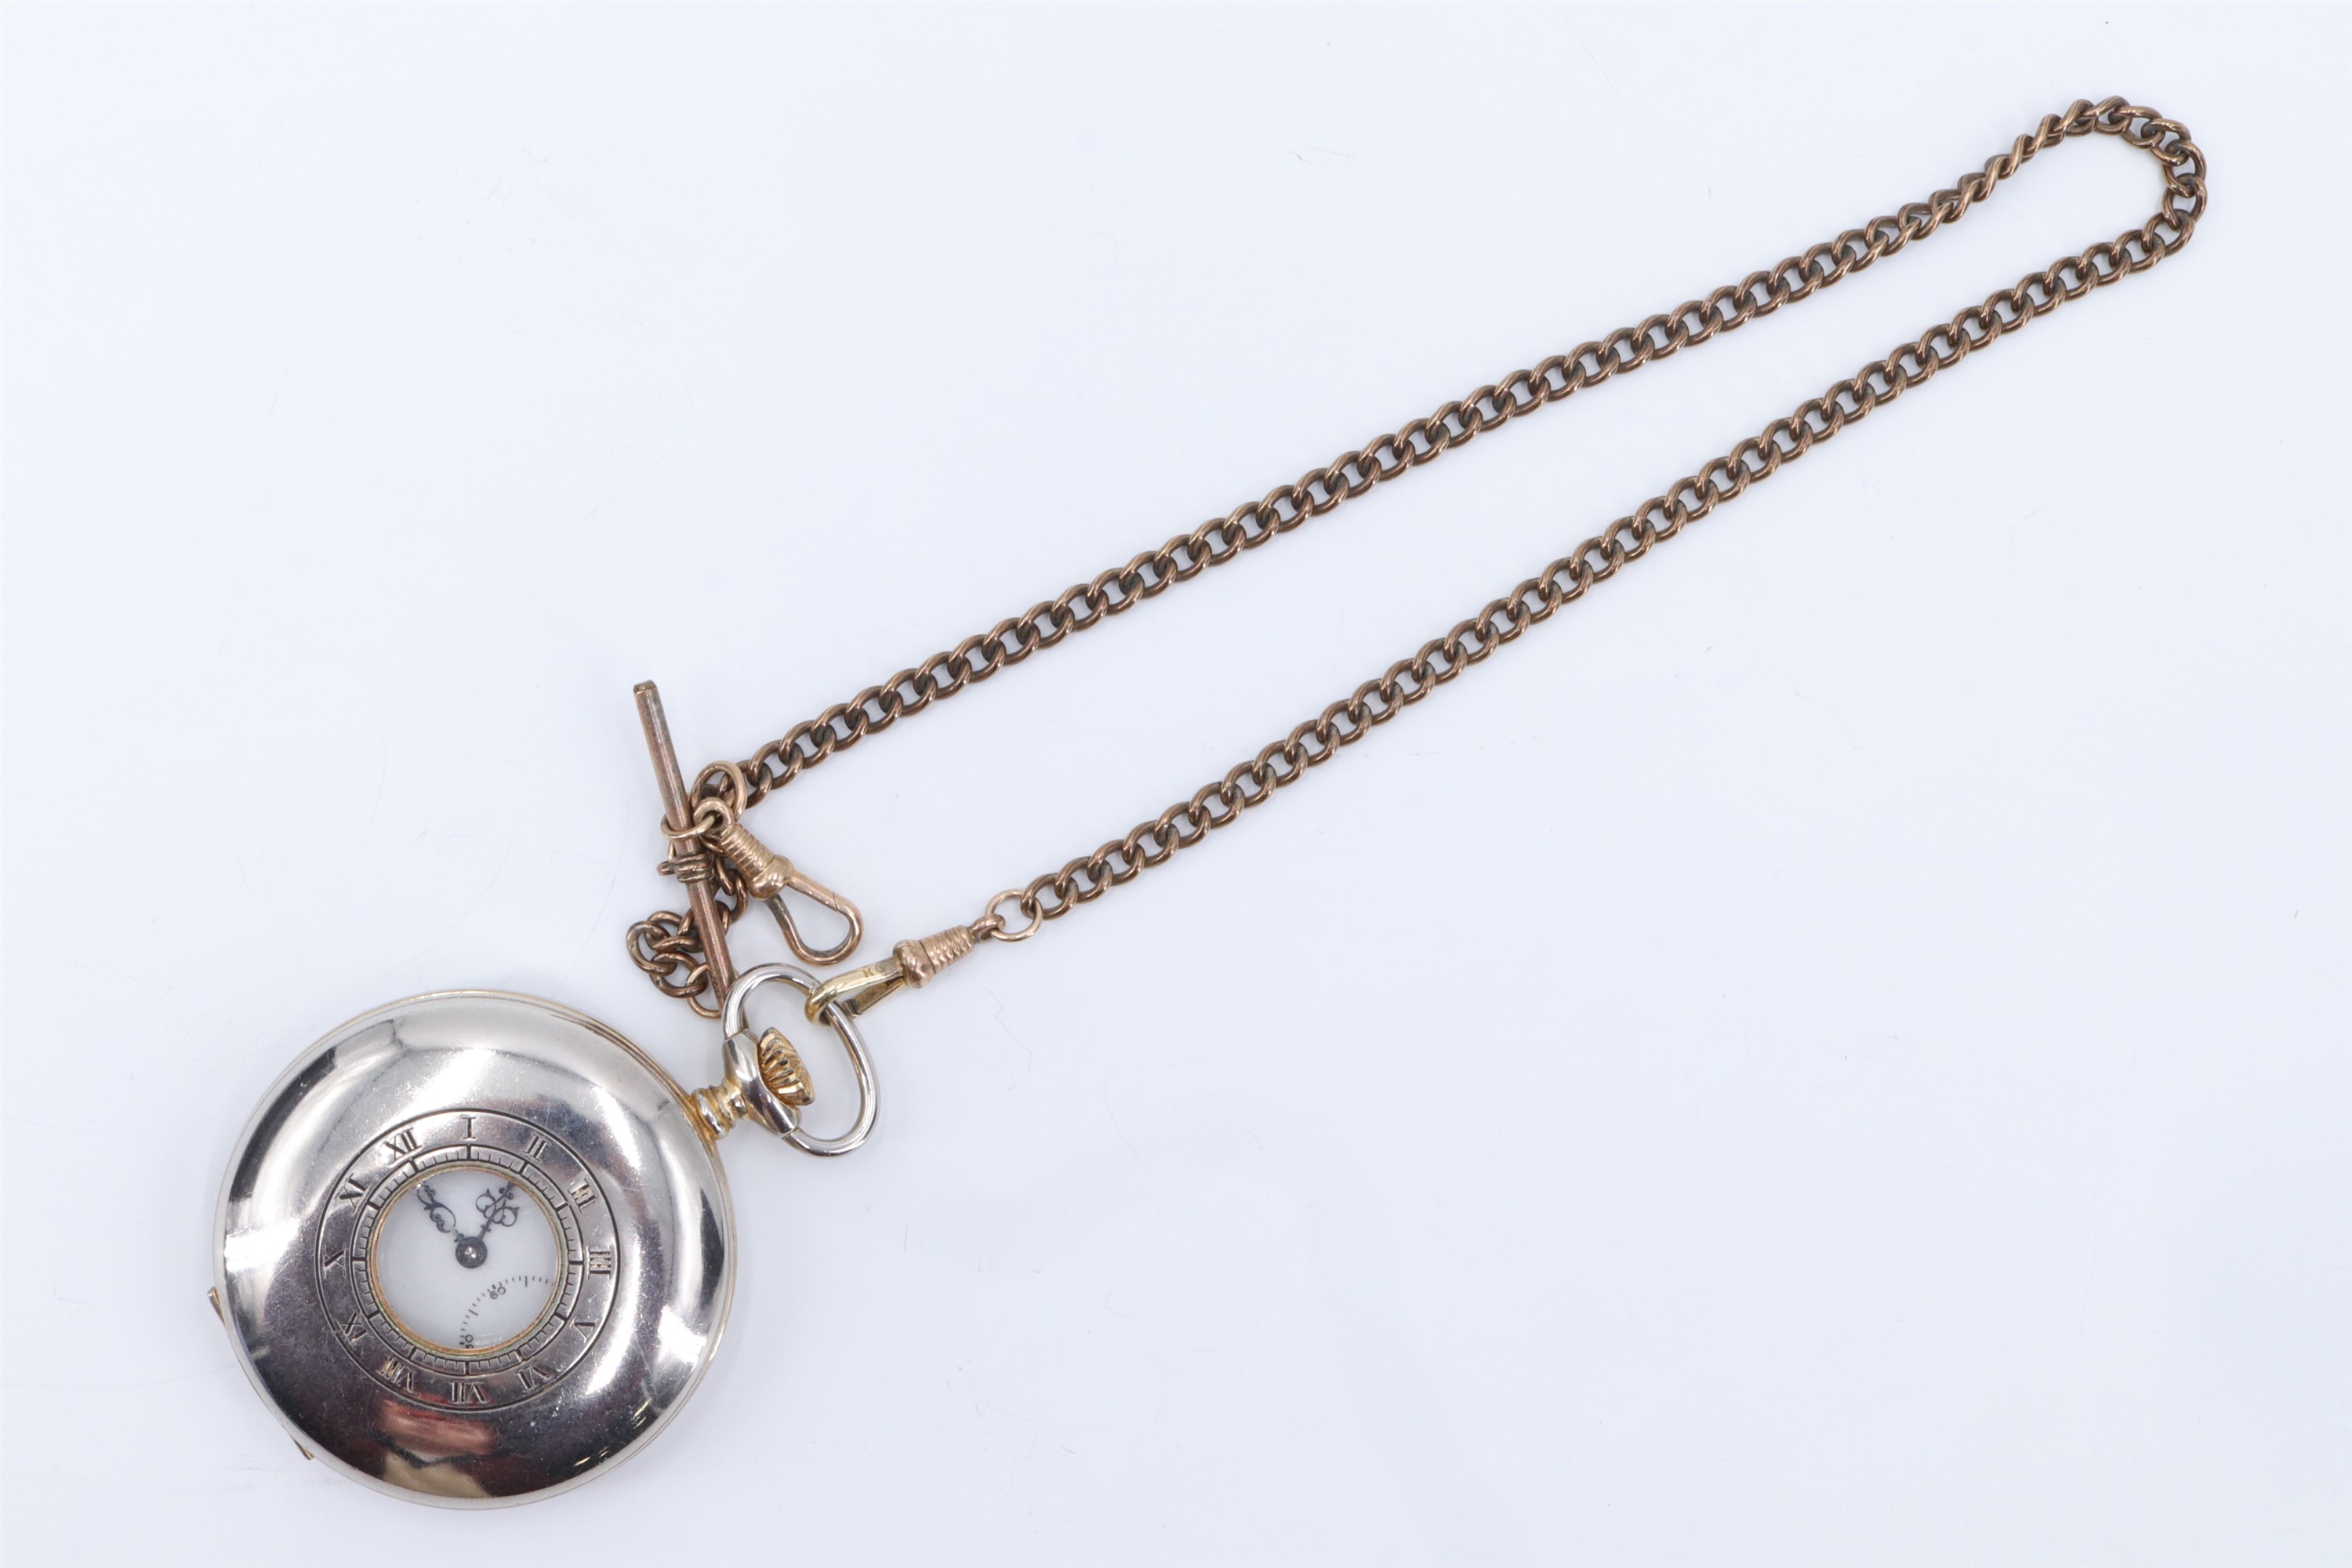 A contemporary pocket watch by James Walker, on a gilt metal watch chain, watch 5 cm excluding